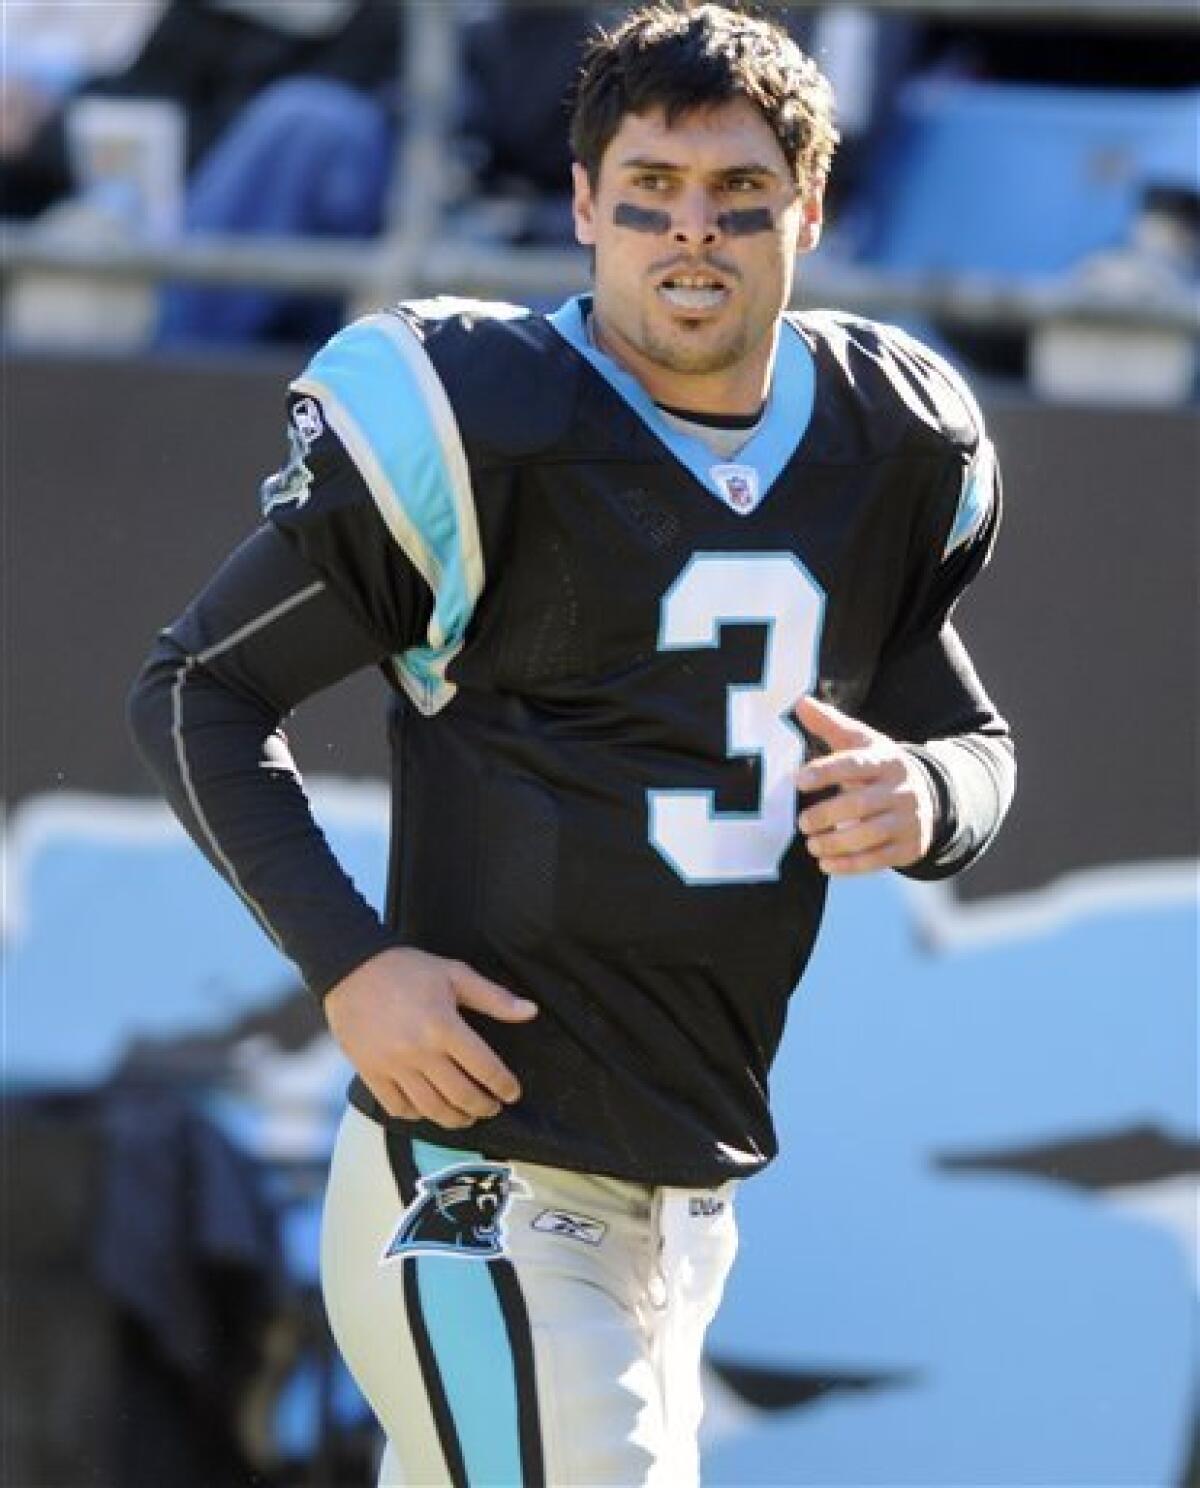 Shoulder injury ends Panthers QB Moore's season - The San Diego